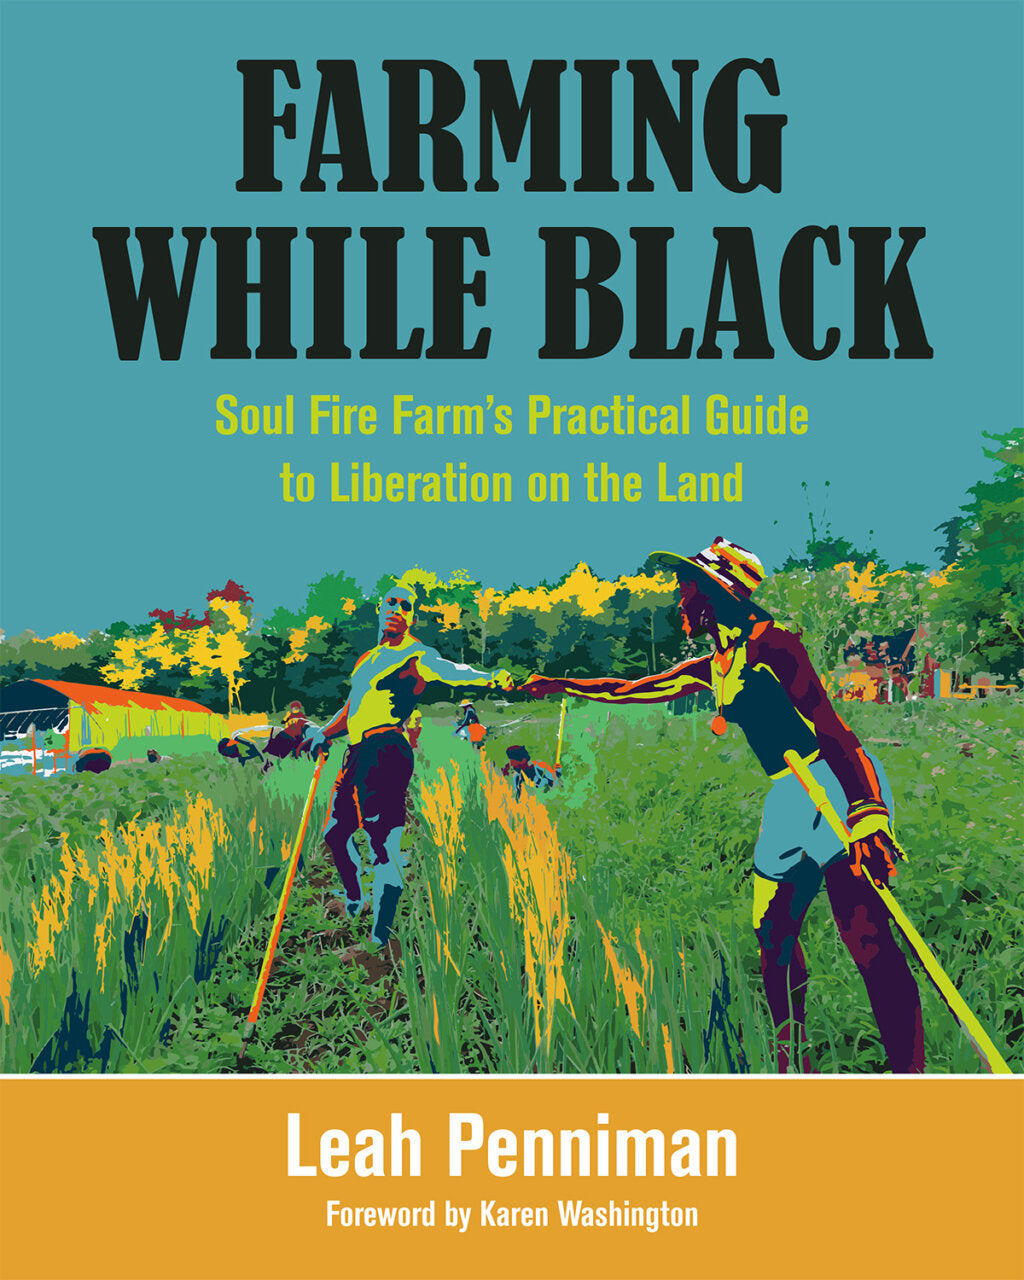 A multicolored cover with a blue sky and a green field. Two Black folks are working together in the forefront with others working farther back.